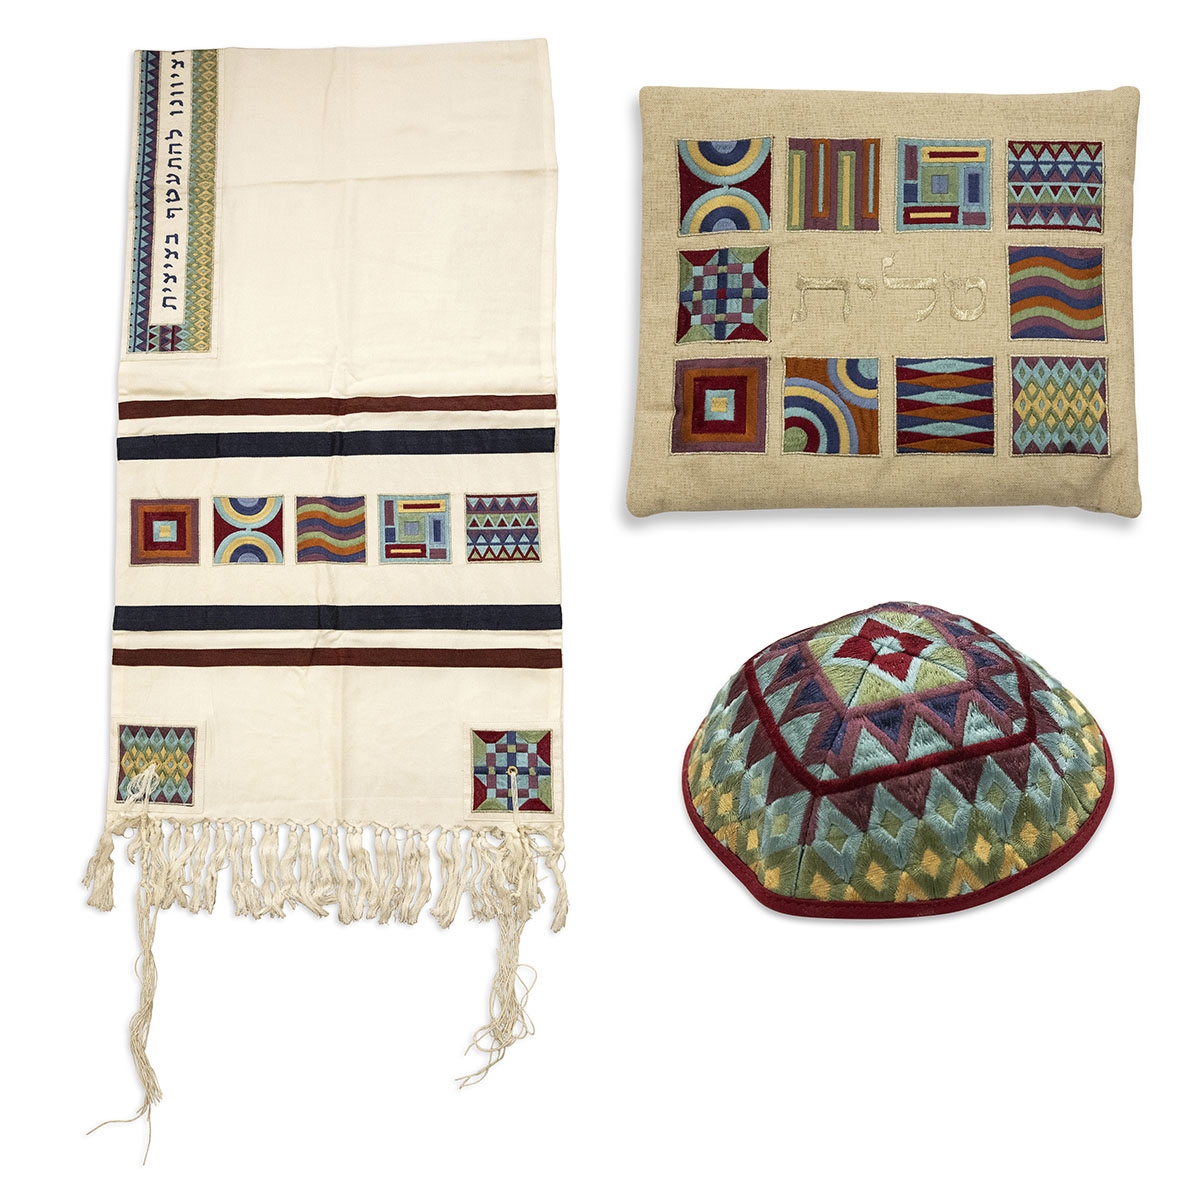 Yair Emanuel Embroidered Tallit Set With Square Patterns – Multicolored - 1